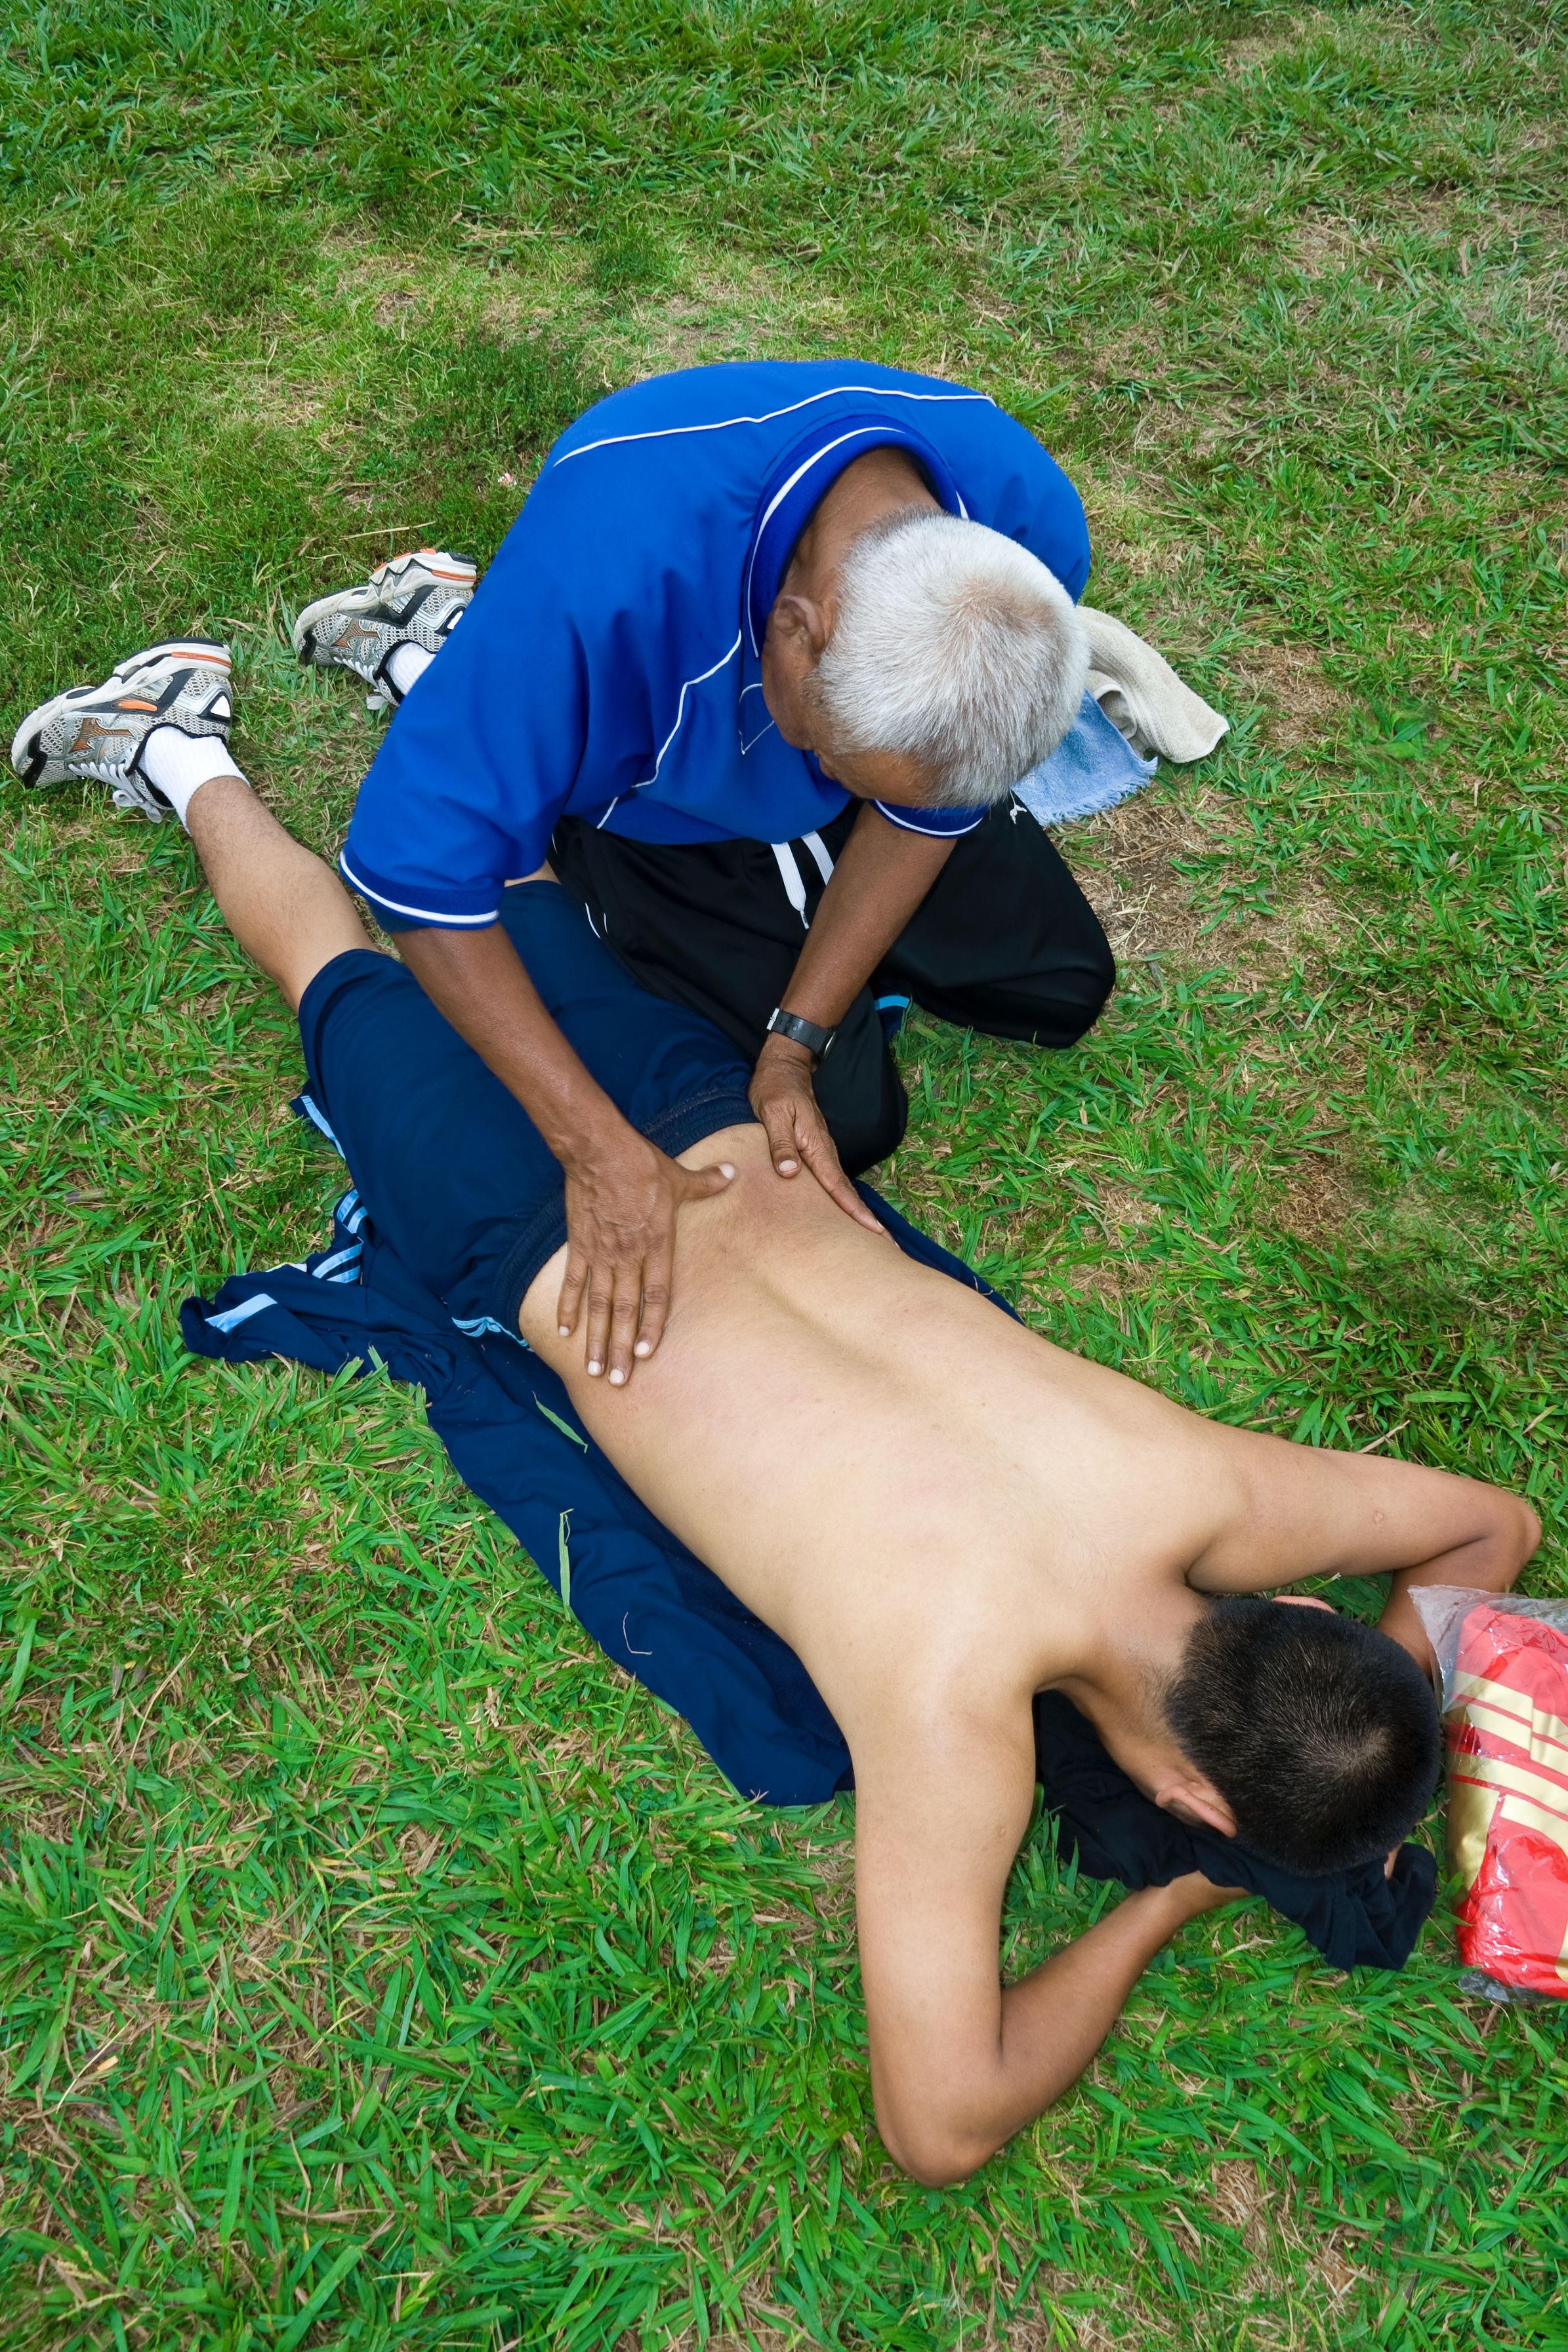 All Types of Sports Injury Treatment in Hampton, GA, Are Available to Help You Feel Better